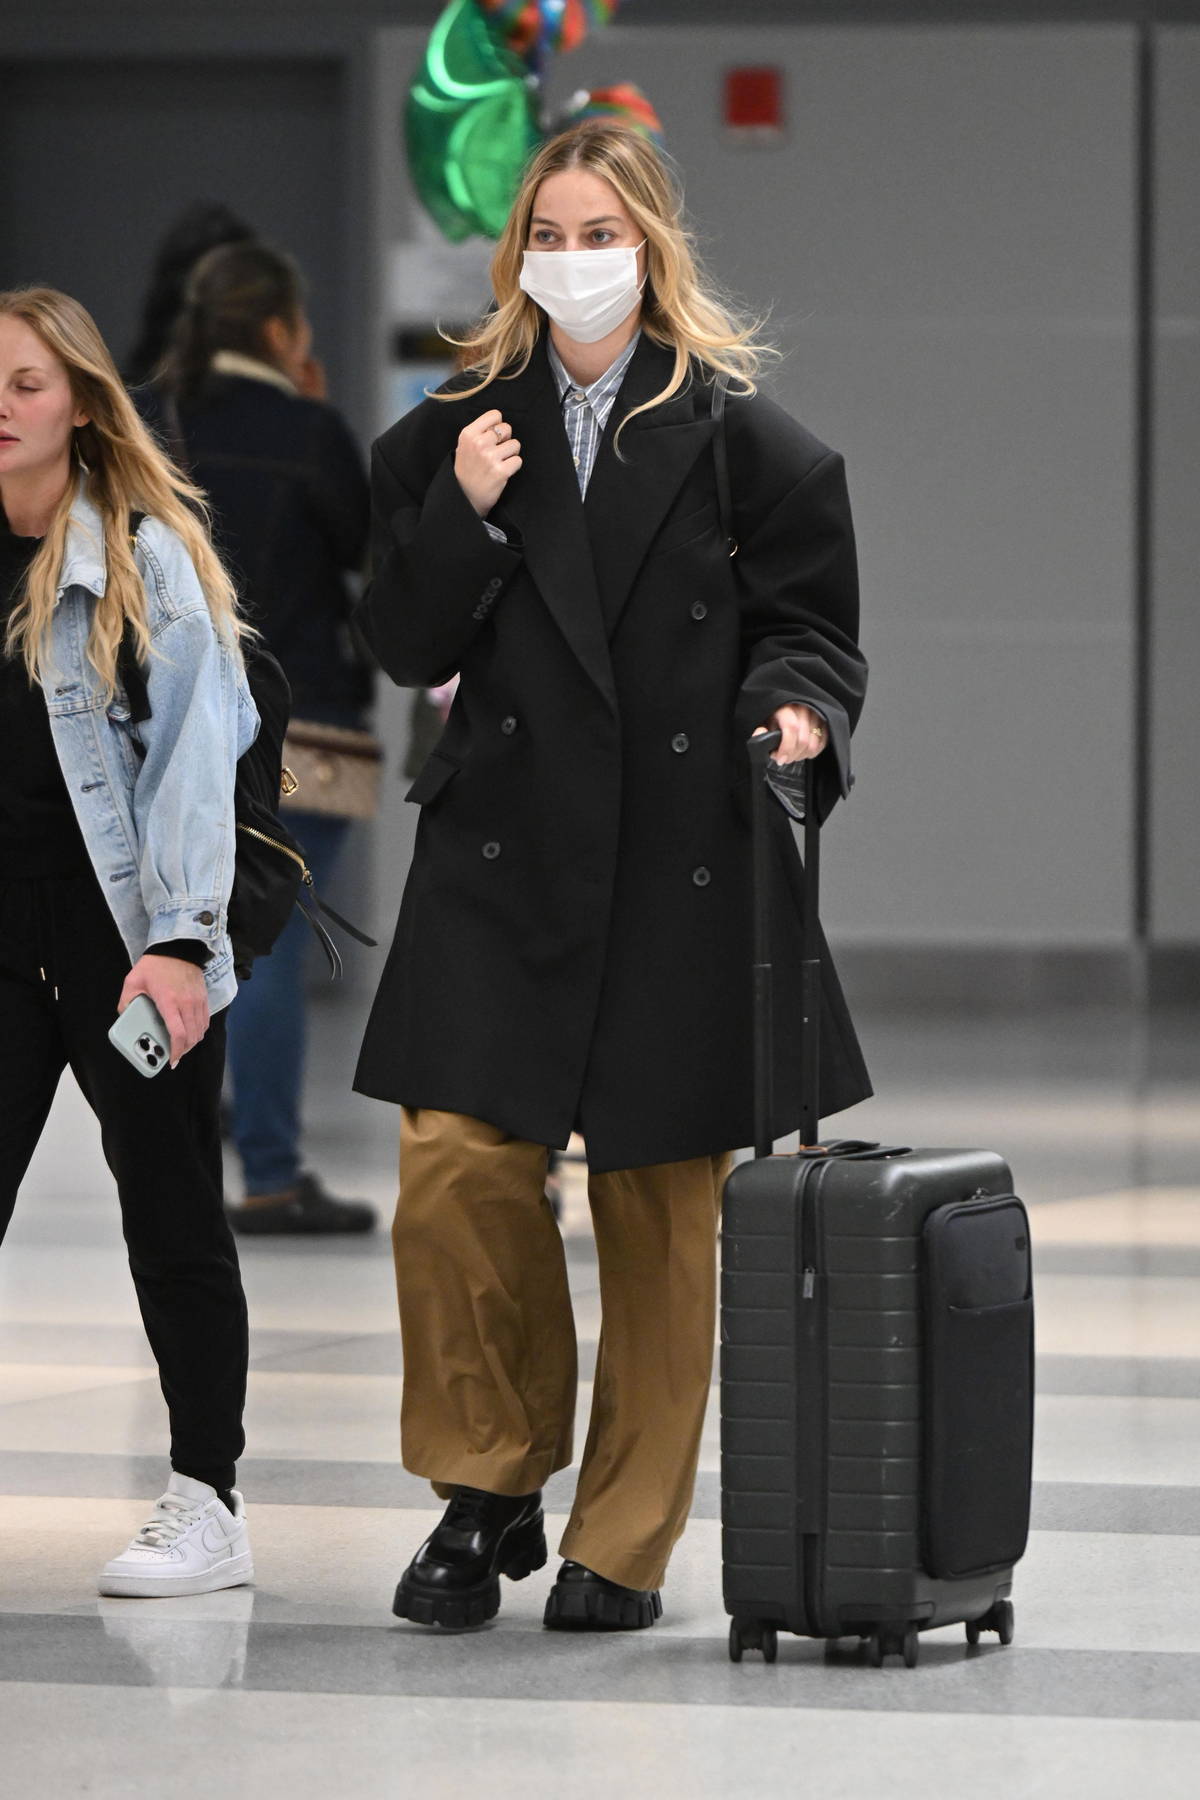 Margot Robbie looks great in a black coat and khaki trousers as